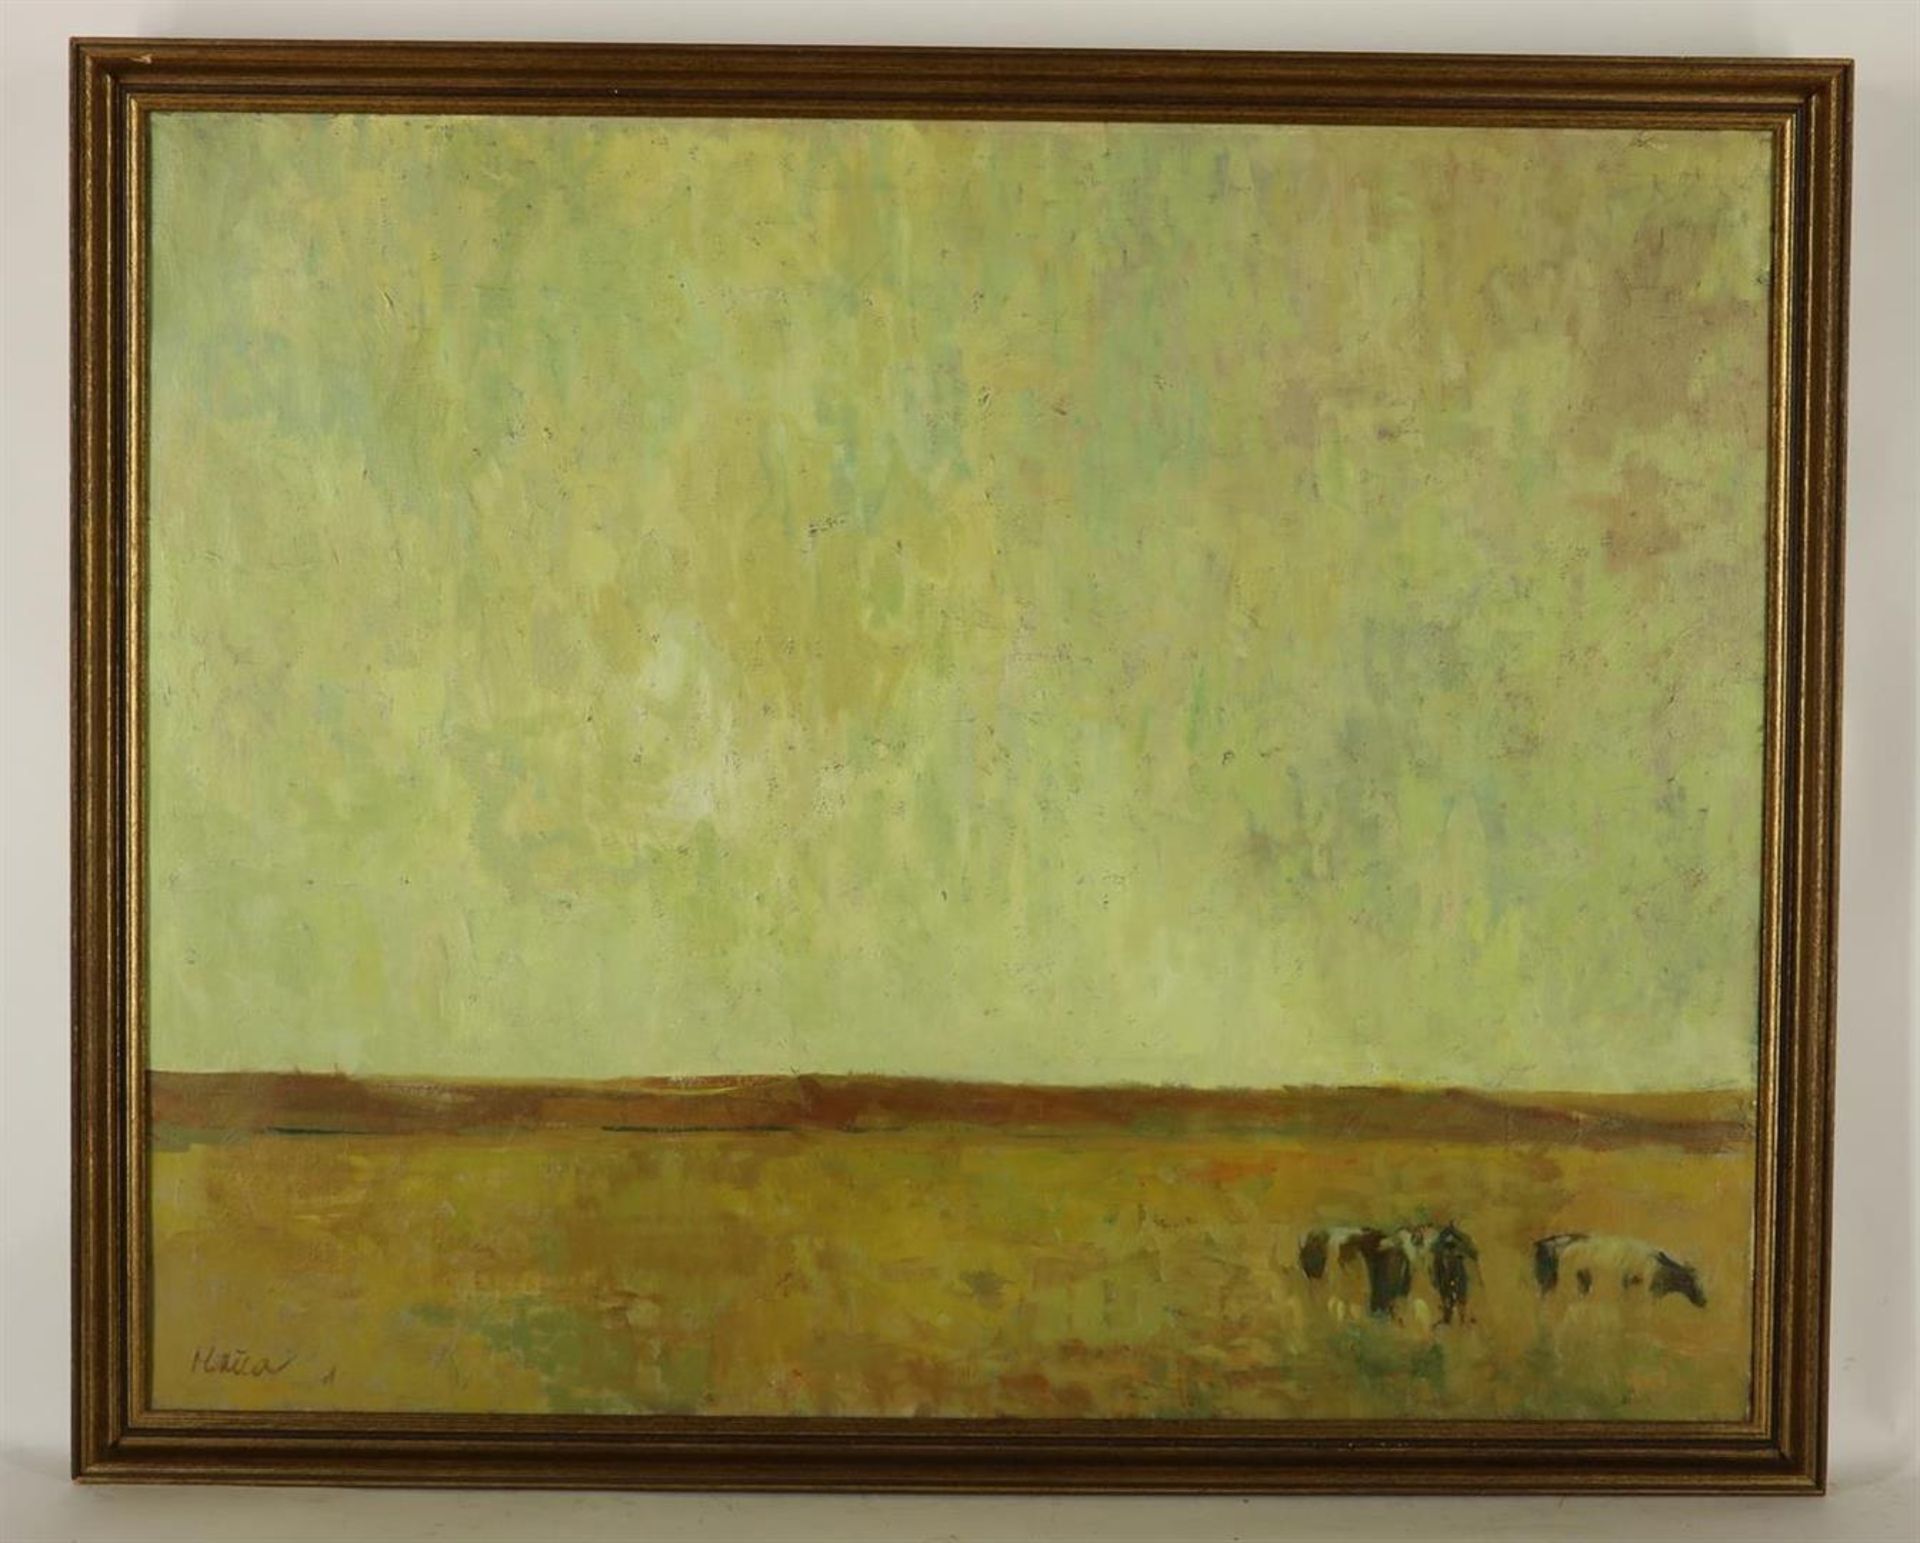 Monica Rotgans (1951-) Cows in landscape, signed lower left, oil on canvas, 79 x 99 cm. - Image 2 of 4